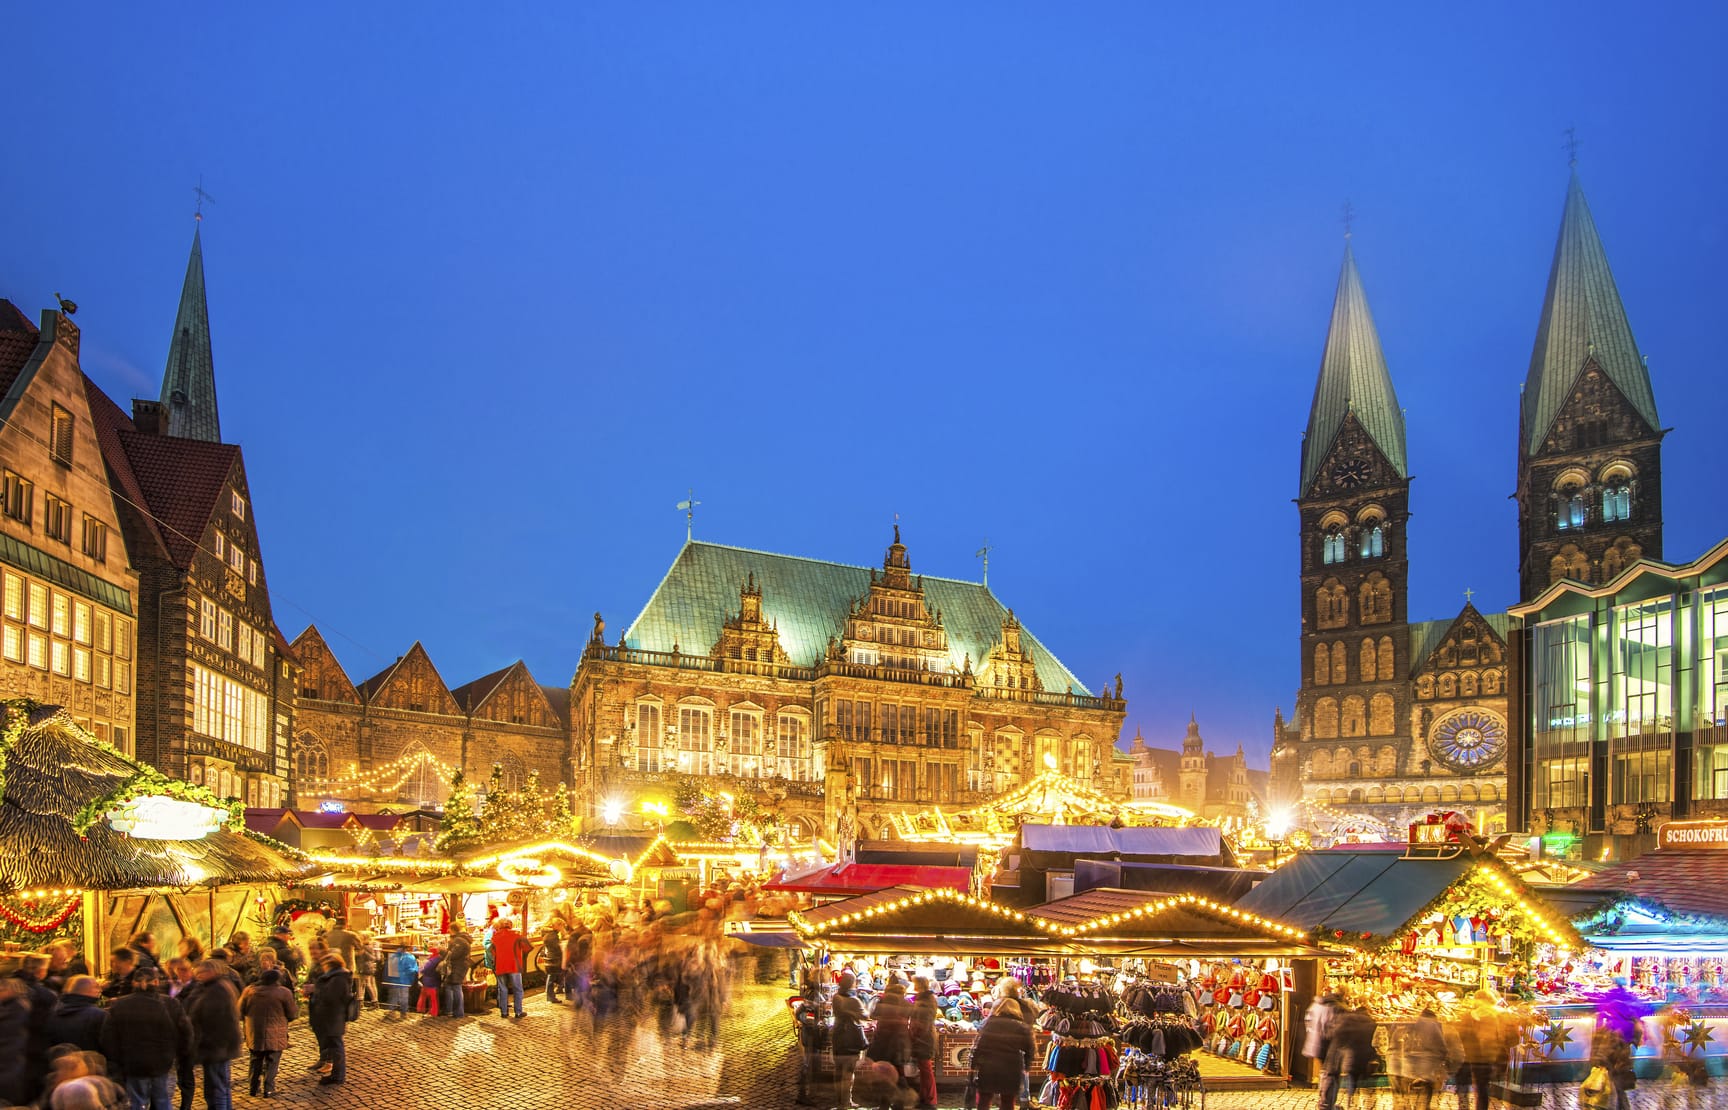 Bremen´s beautiful Christmas market at the city´s town square with the illuminated town hall, St. Peter's Cathedral, and parliament.